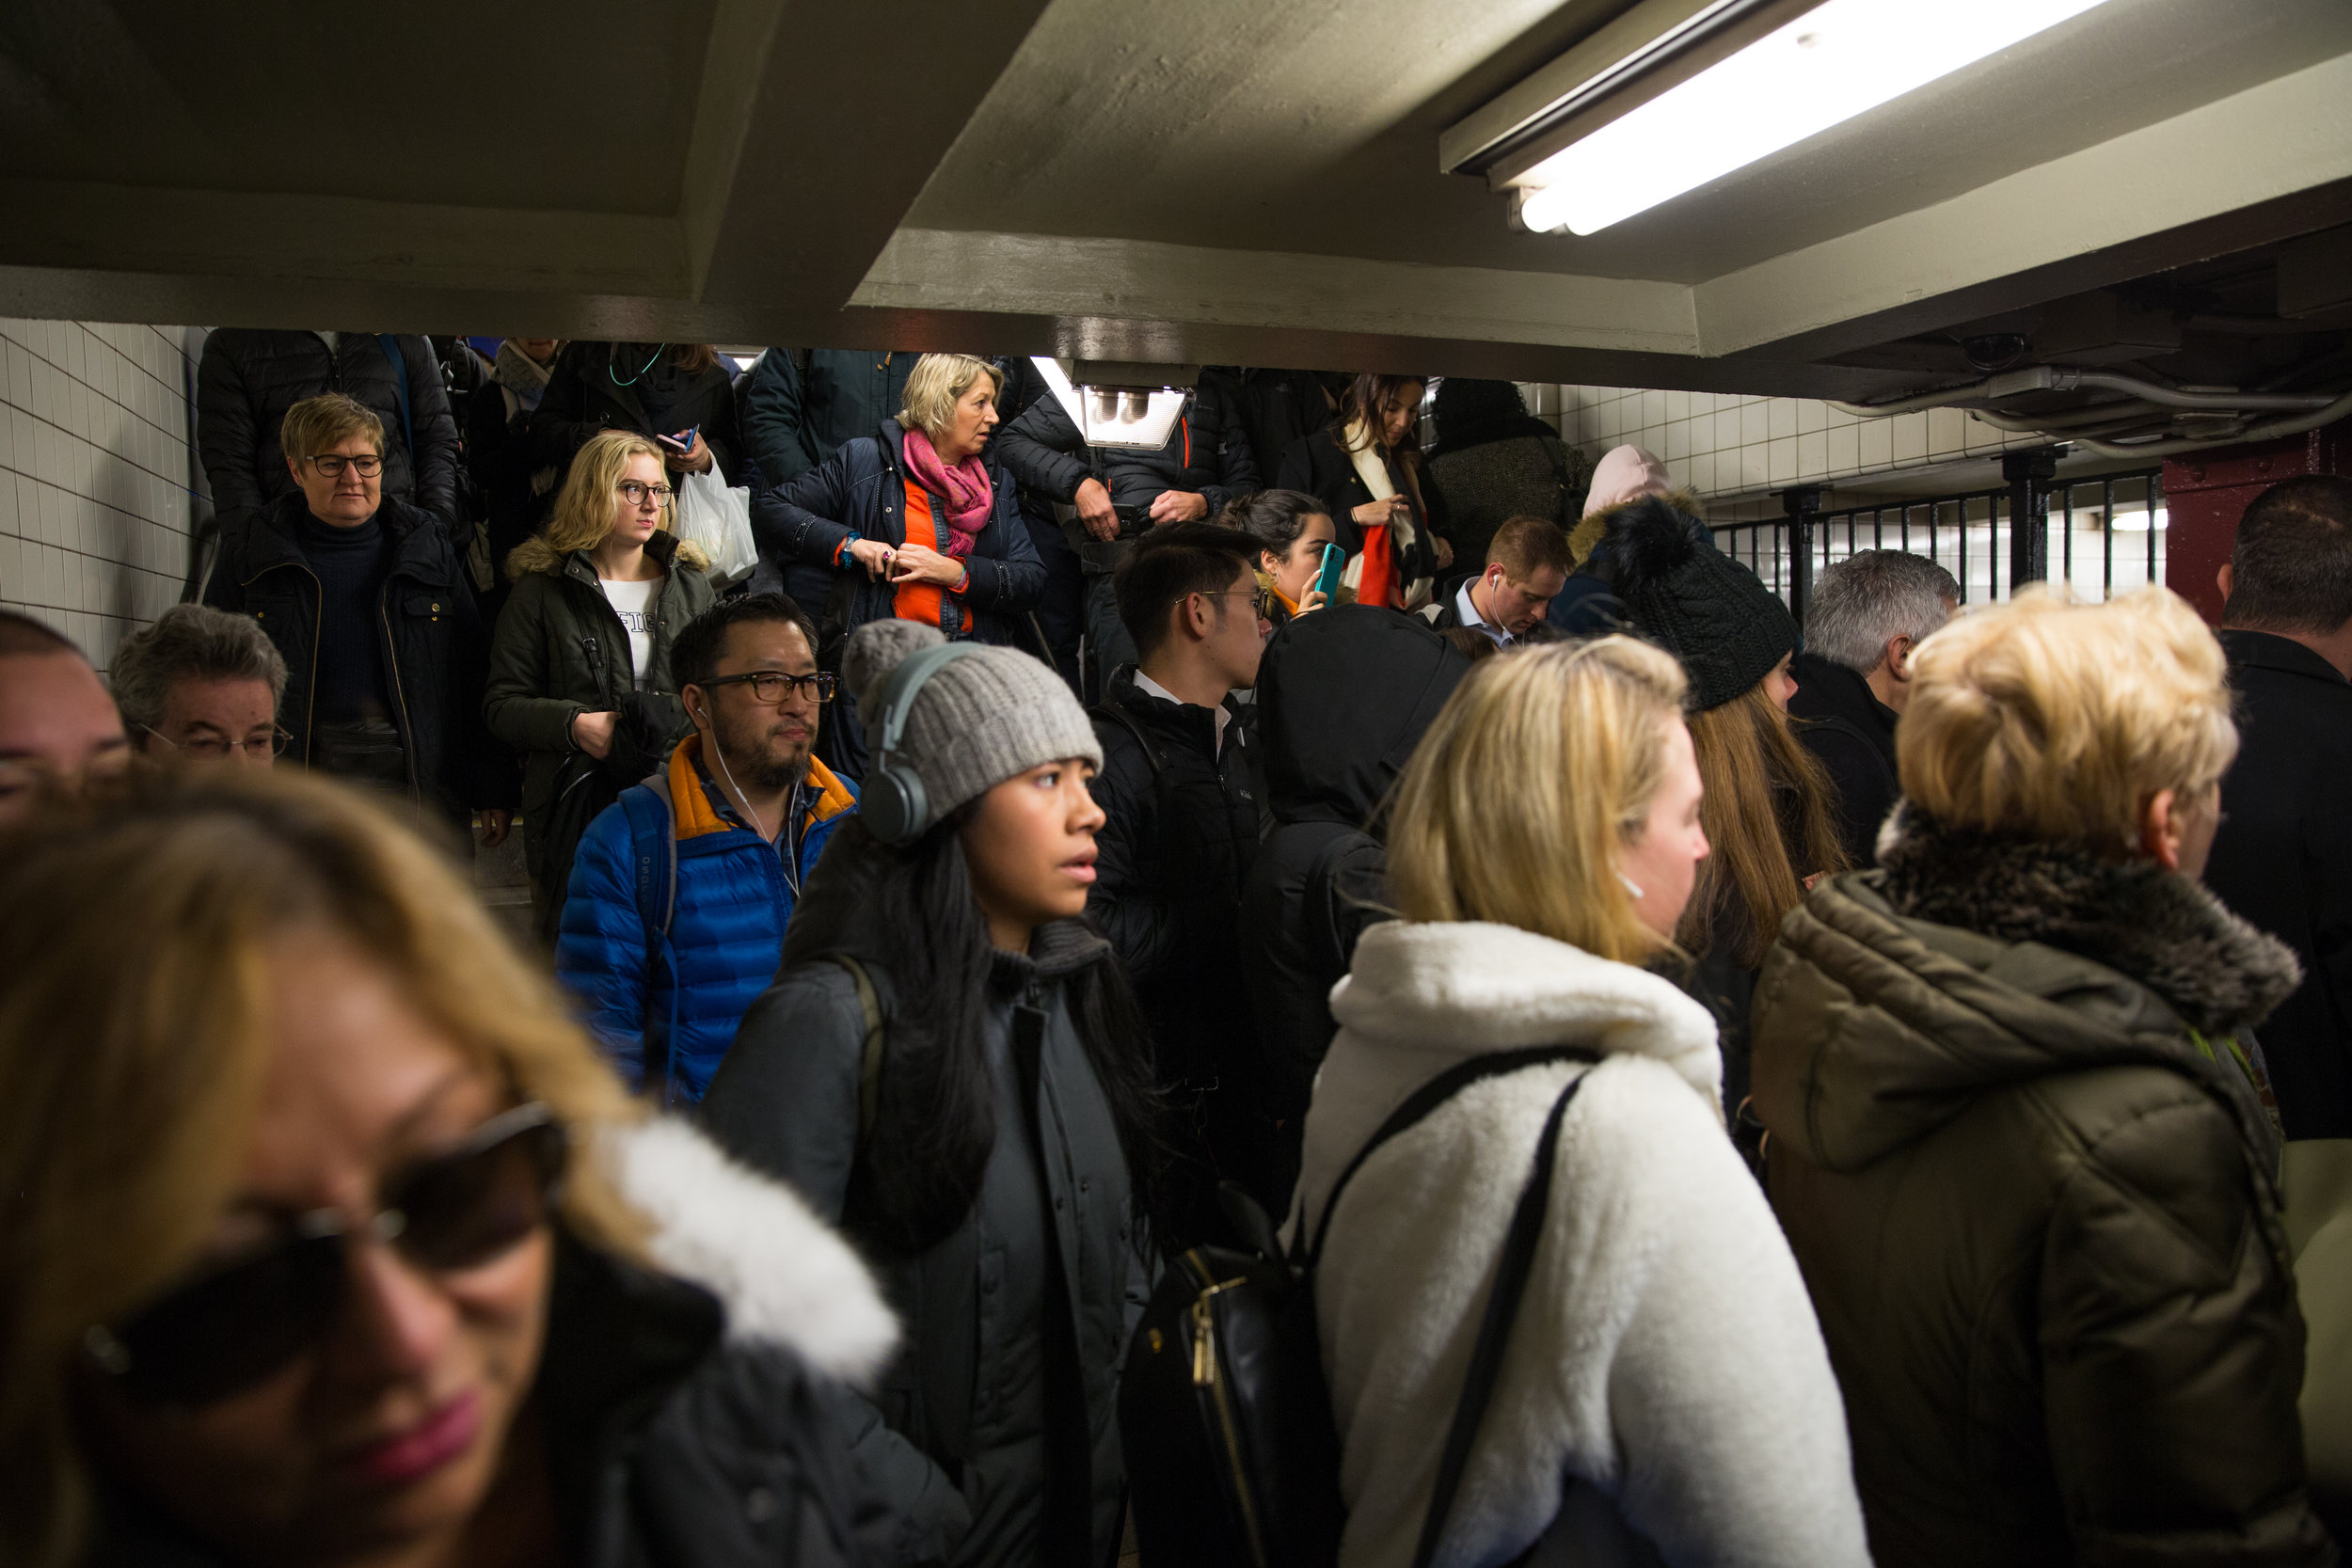  A crowded commute at Court Square. Photographed for a series on new construction related to the L train shutdown. 